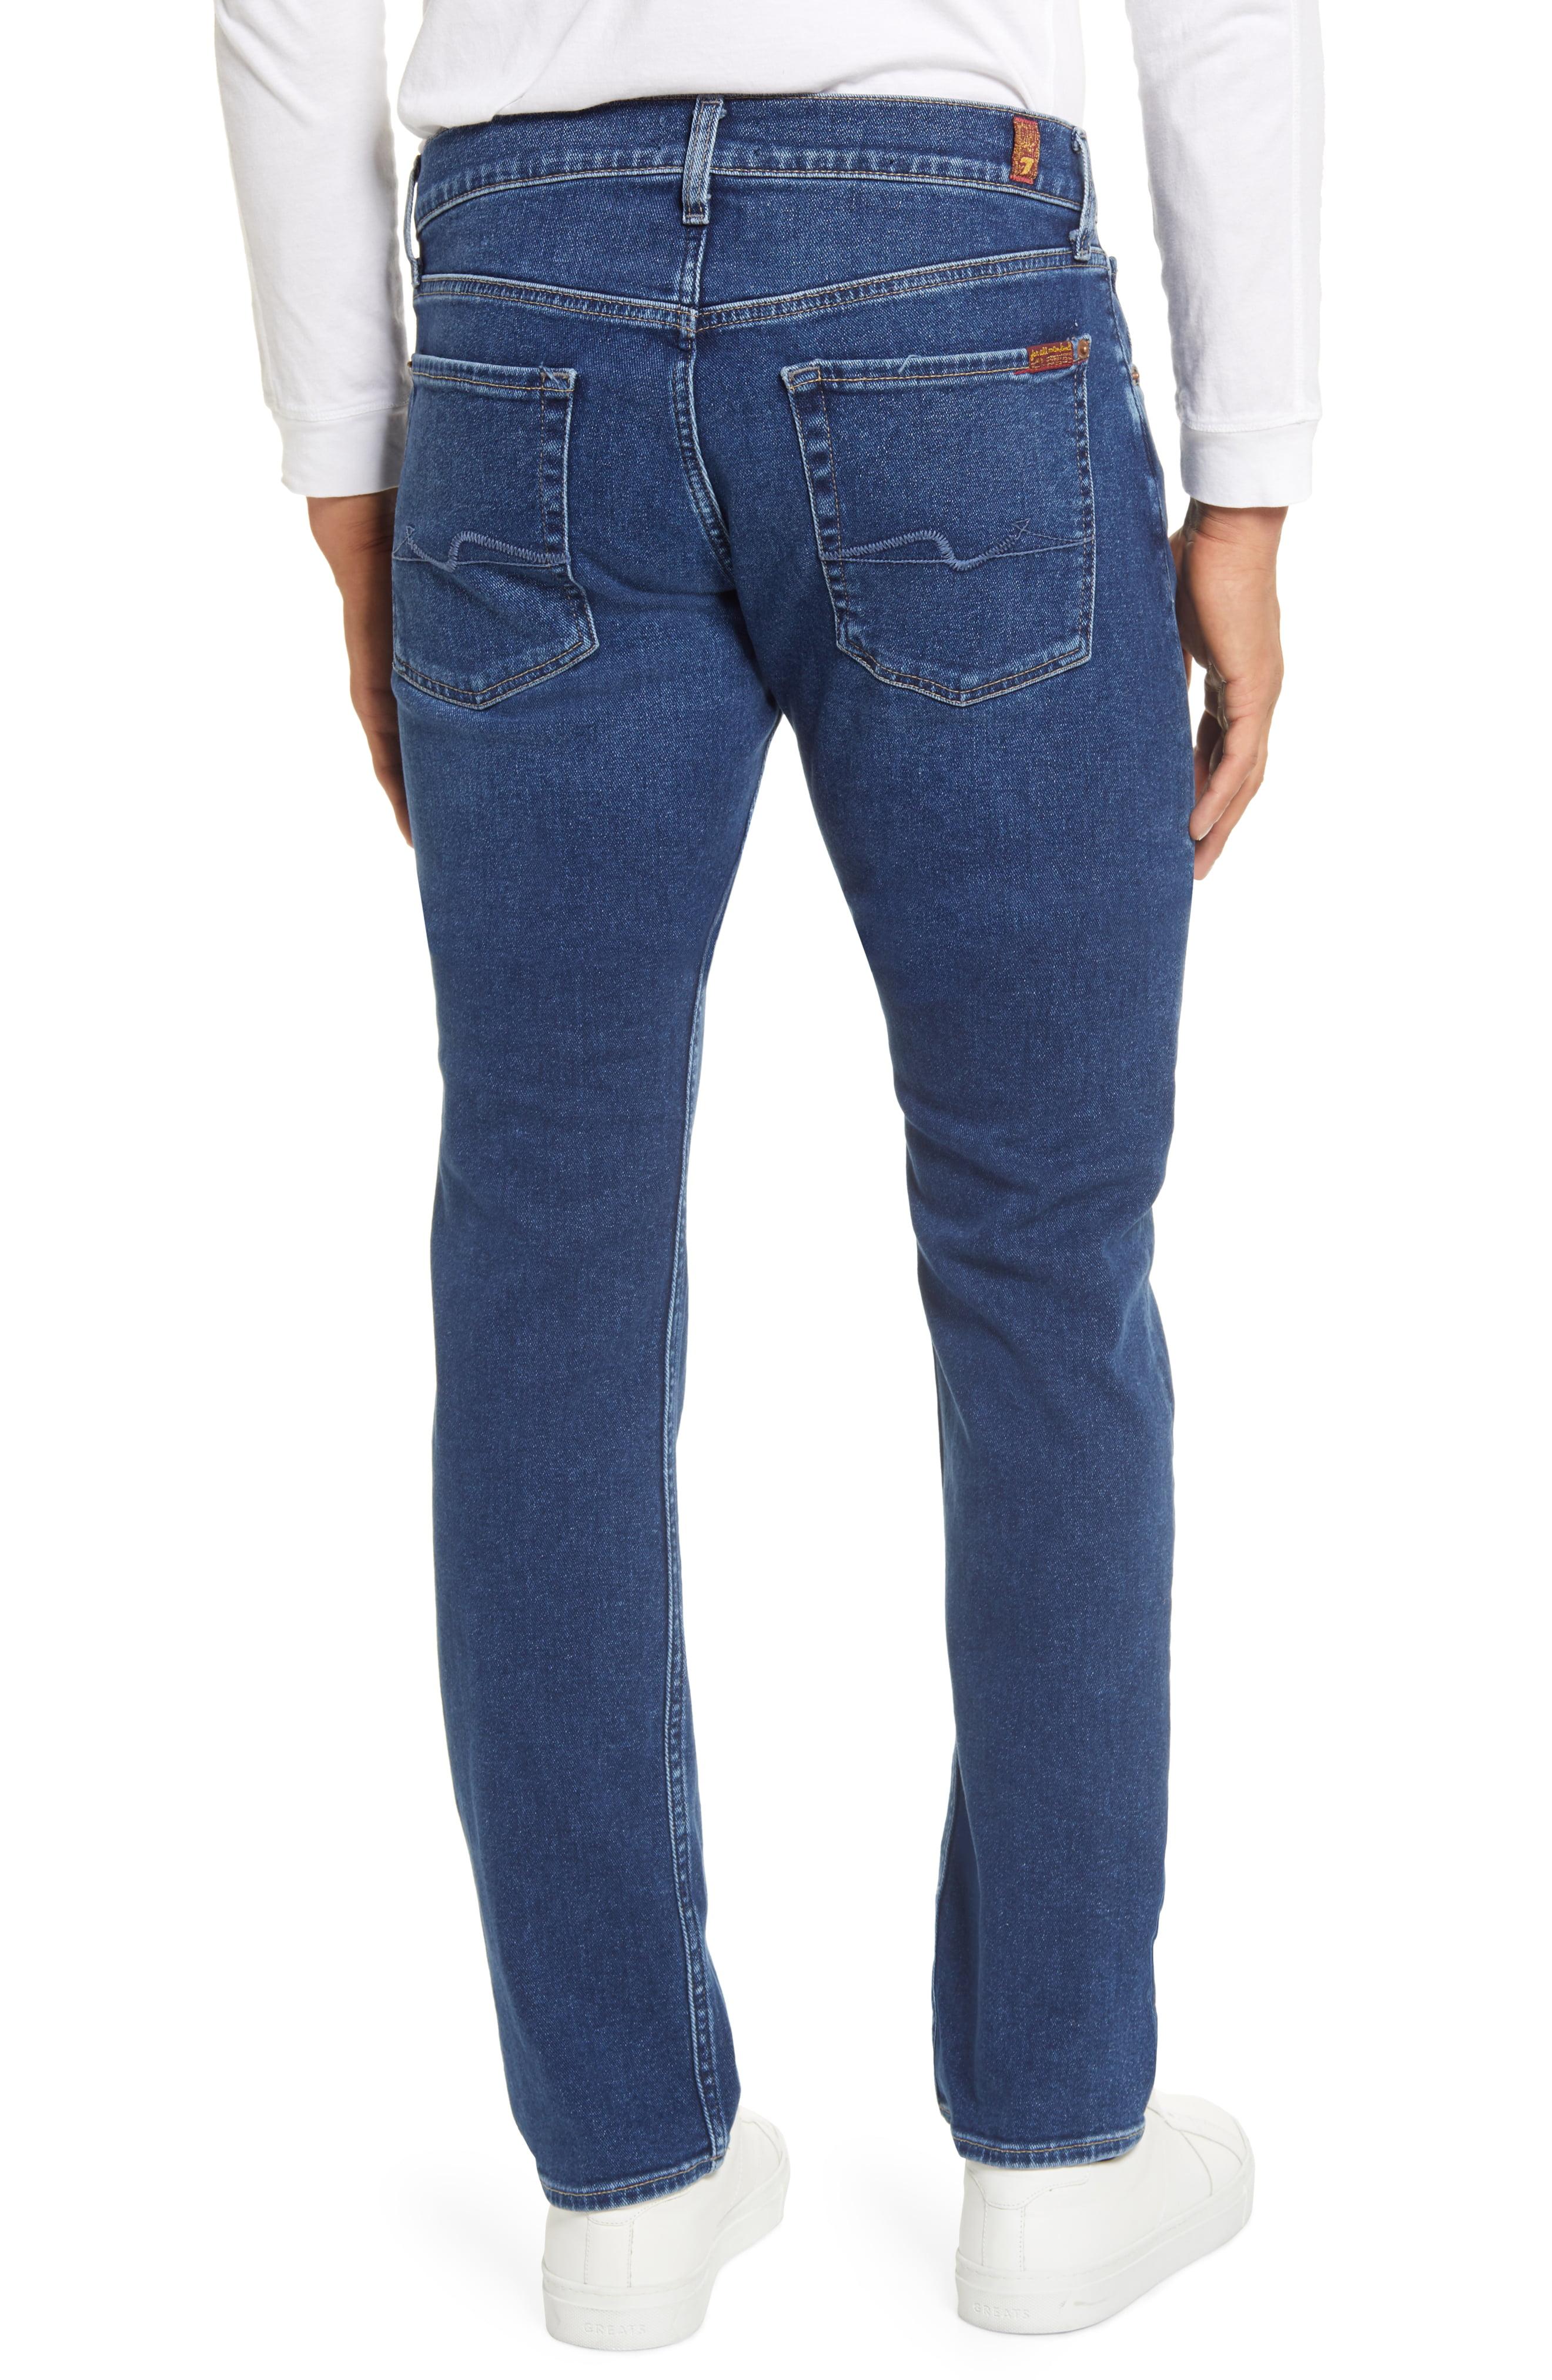 7 For All Mankind Denim 7 For All Mankind Straight Leg Jeans in Blue ...